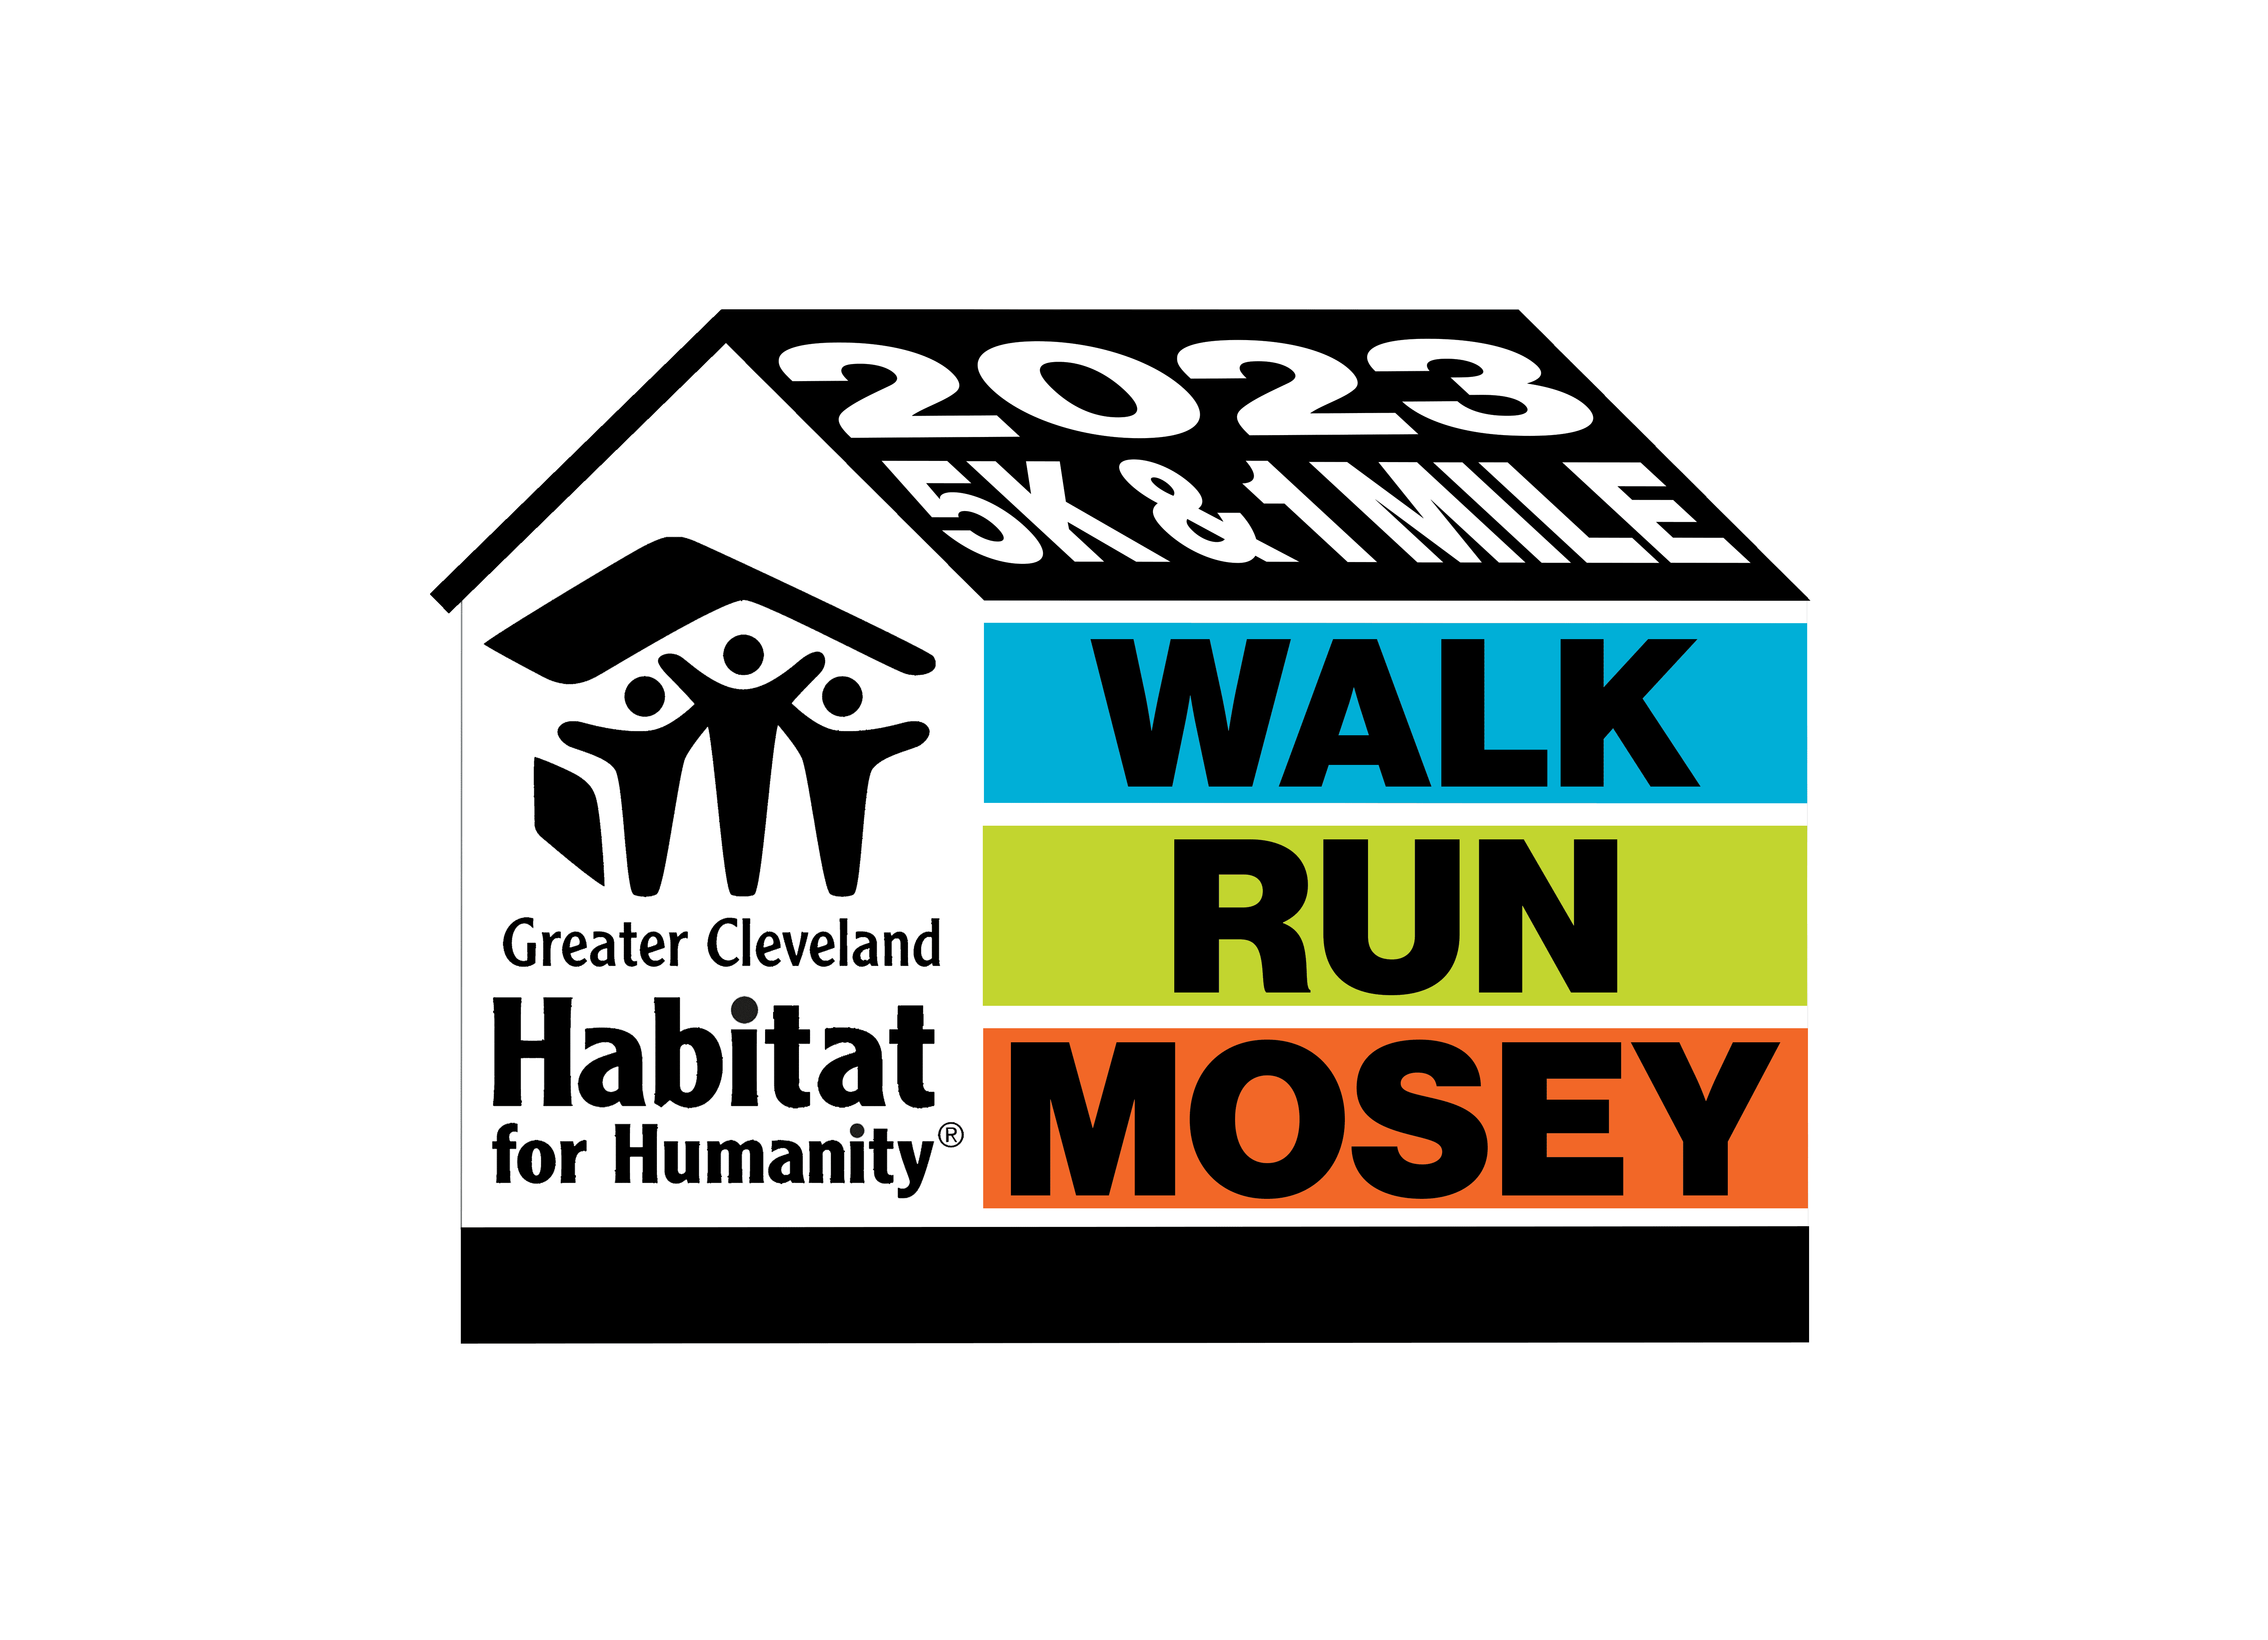 Habitat for Humanity, Greater Cleveland is hosting its annual Walk, Run, Mosey fundraiser July 8th at Edgewater Park